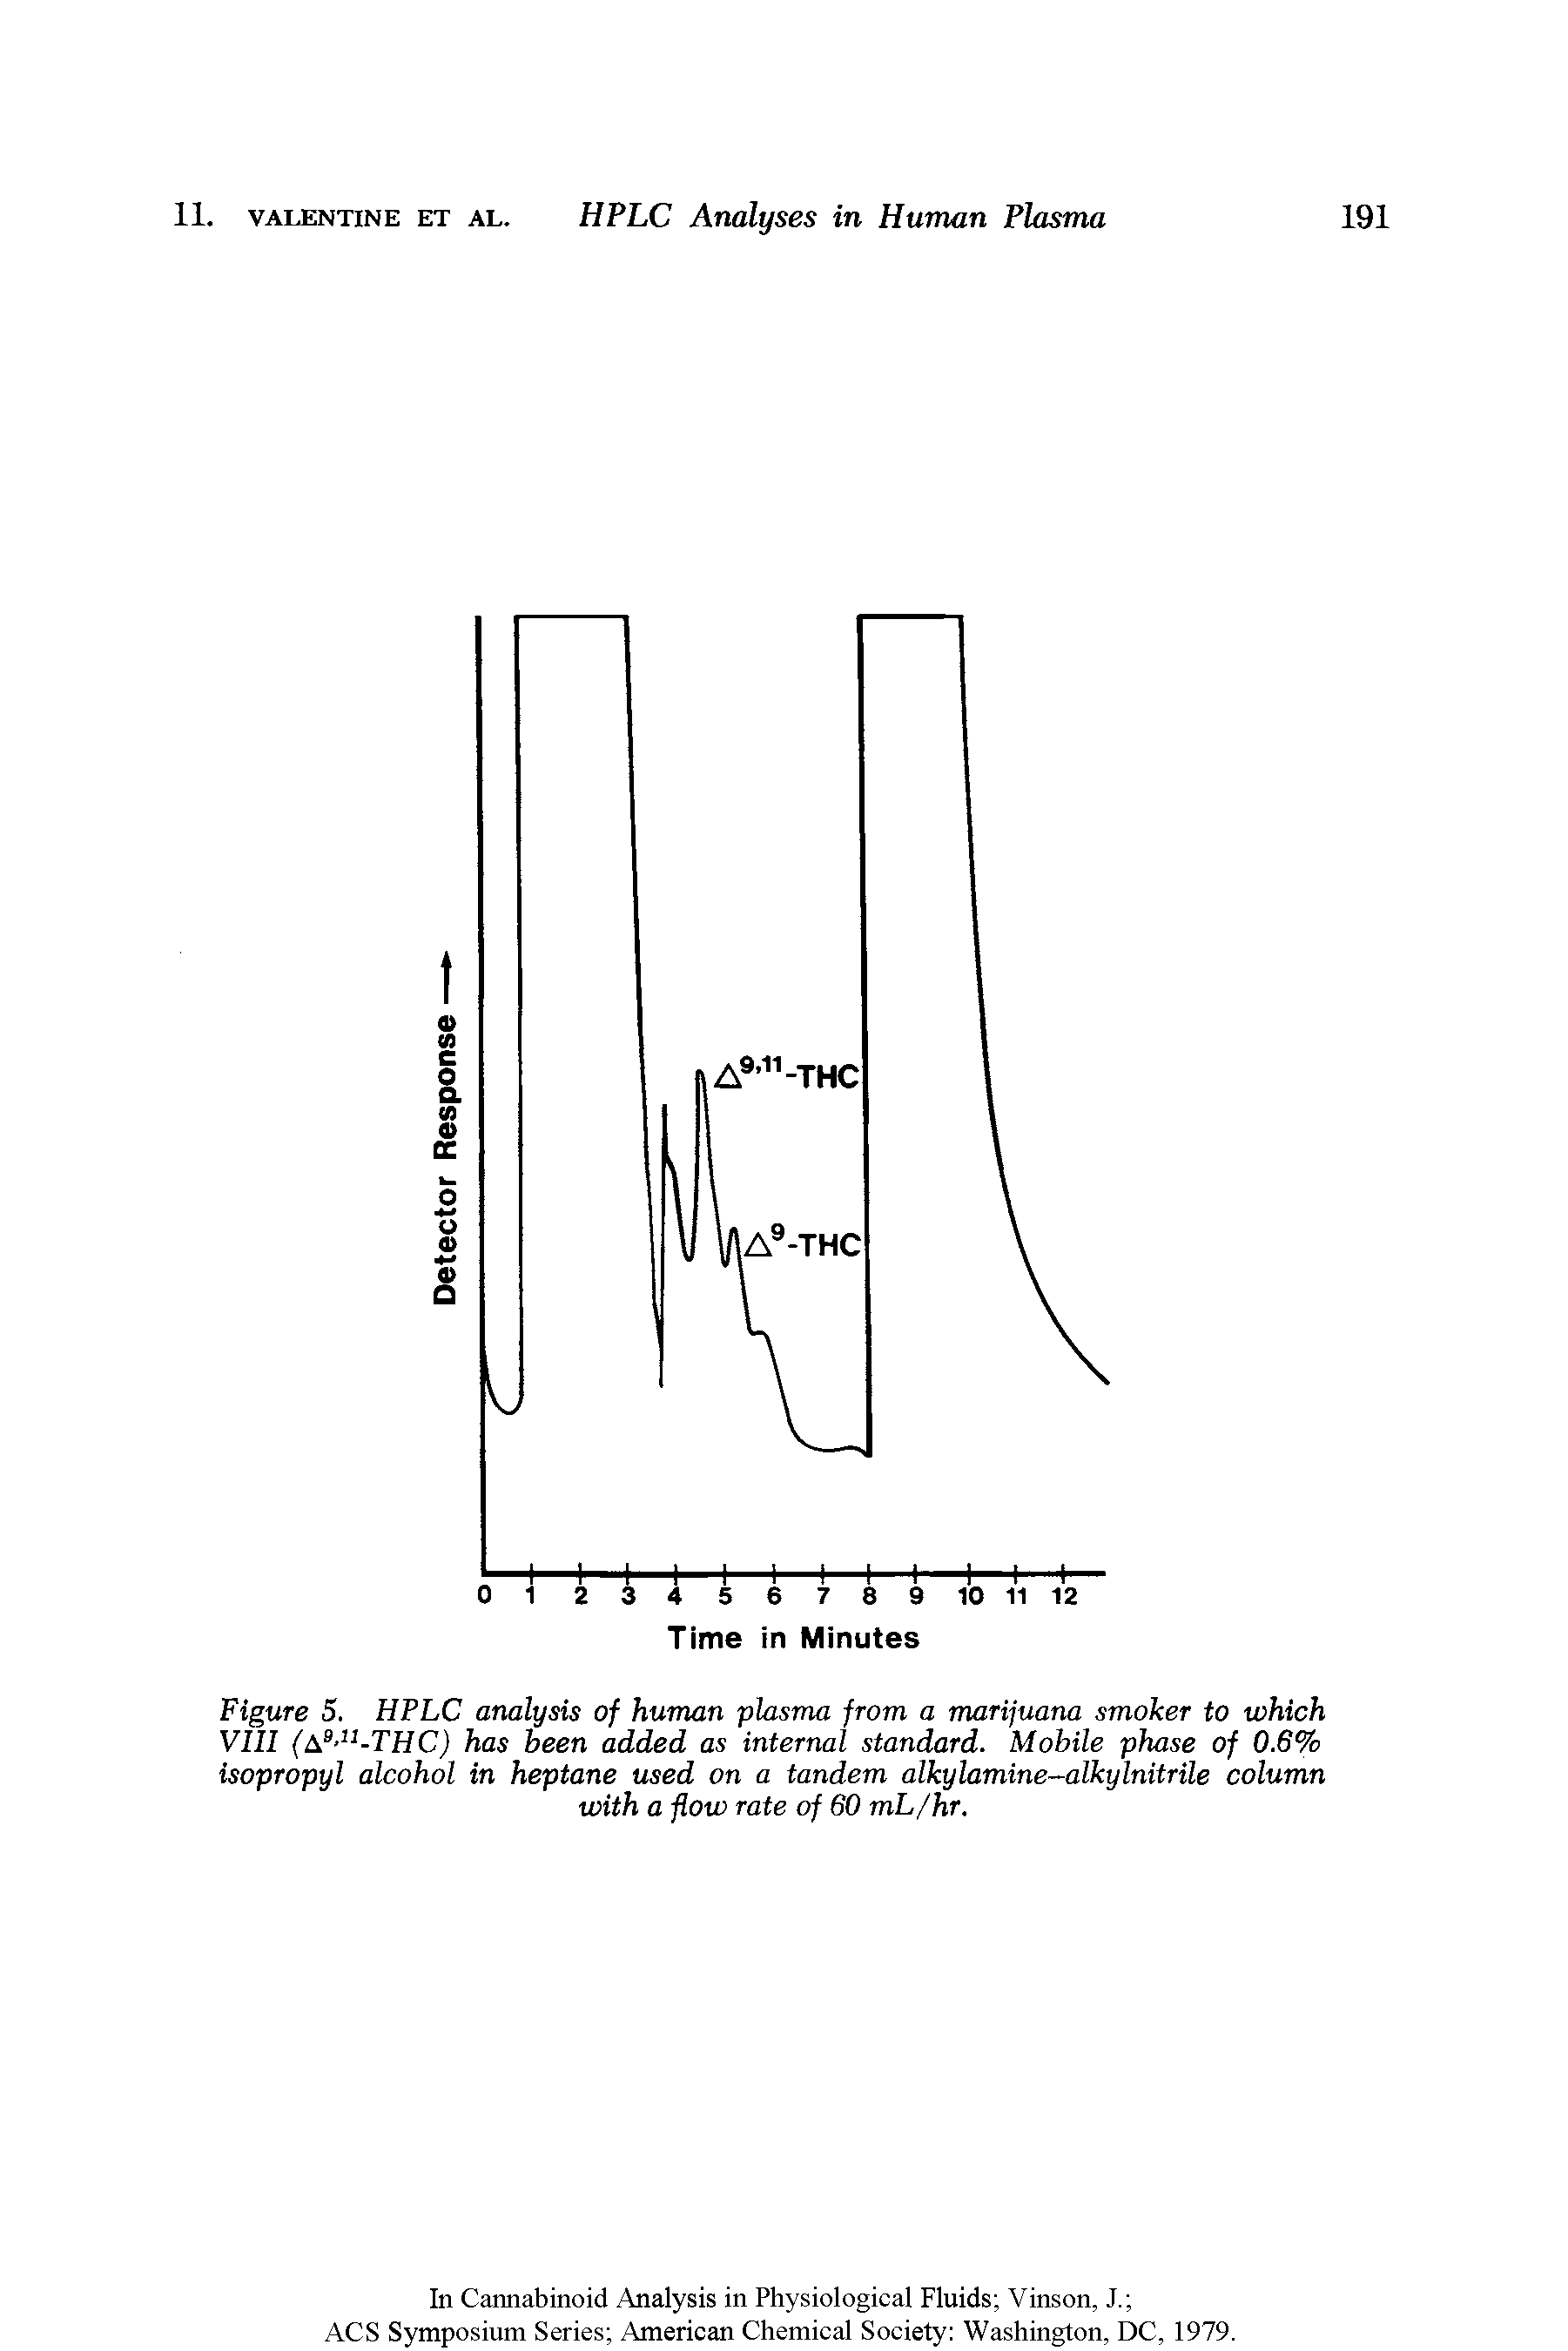 Figure 5. HPLC analysis of human plasma from a marijuana smoker to which yill (A9-u-THC) has been added as internal standard. Mobile phase of 0.6% isopropyl alcohol in heptane used on a tandem alkylamine—alkylnitrile column with a flow rate of 60 mL/hr.